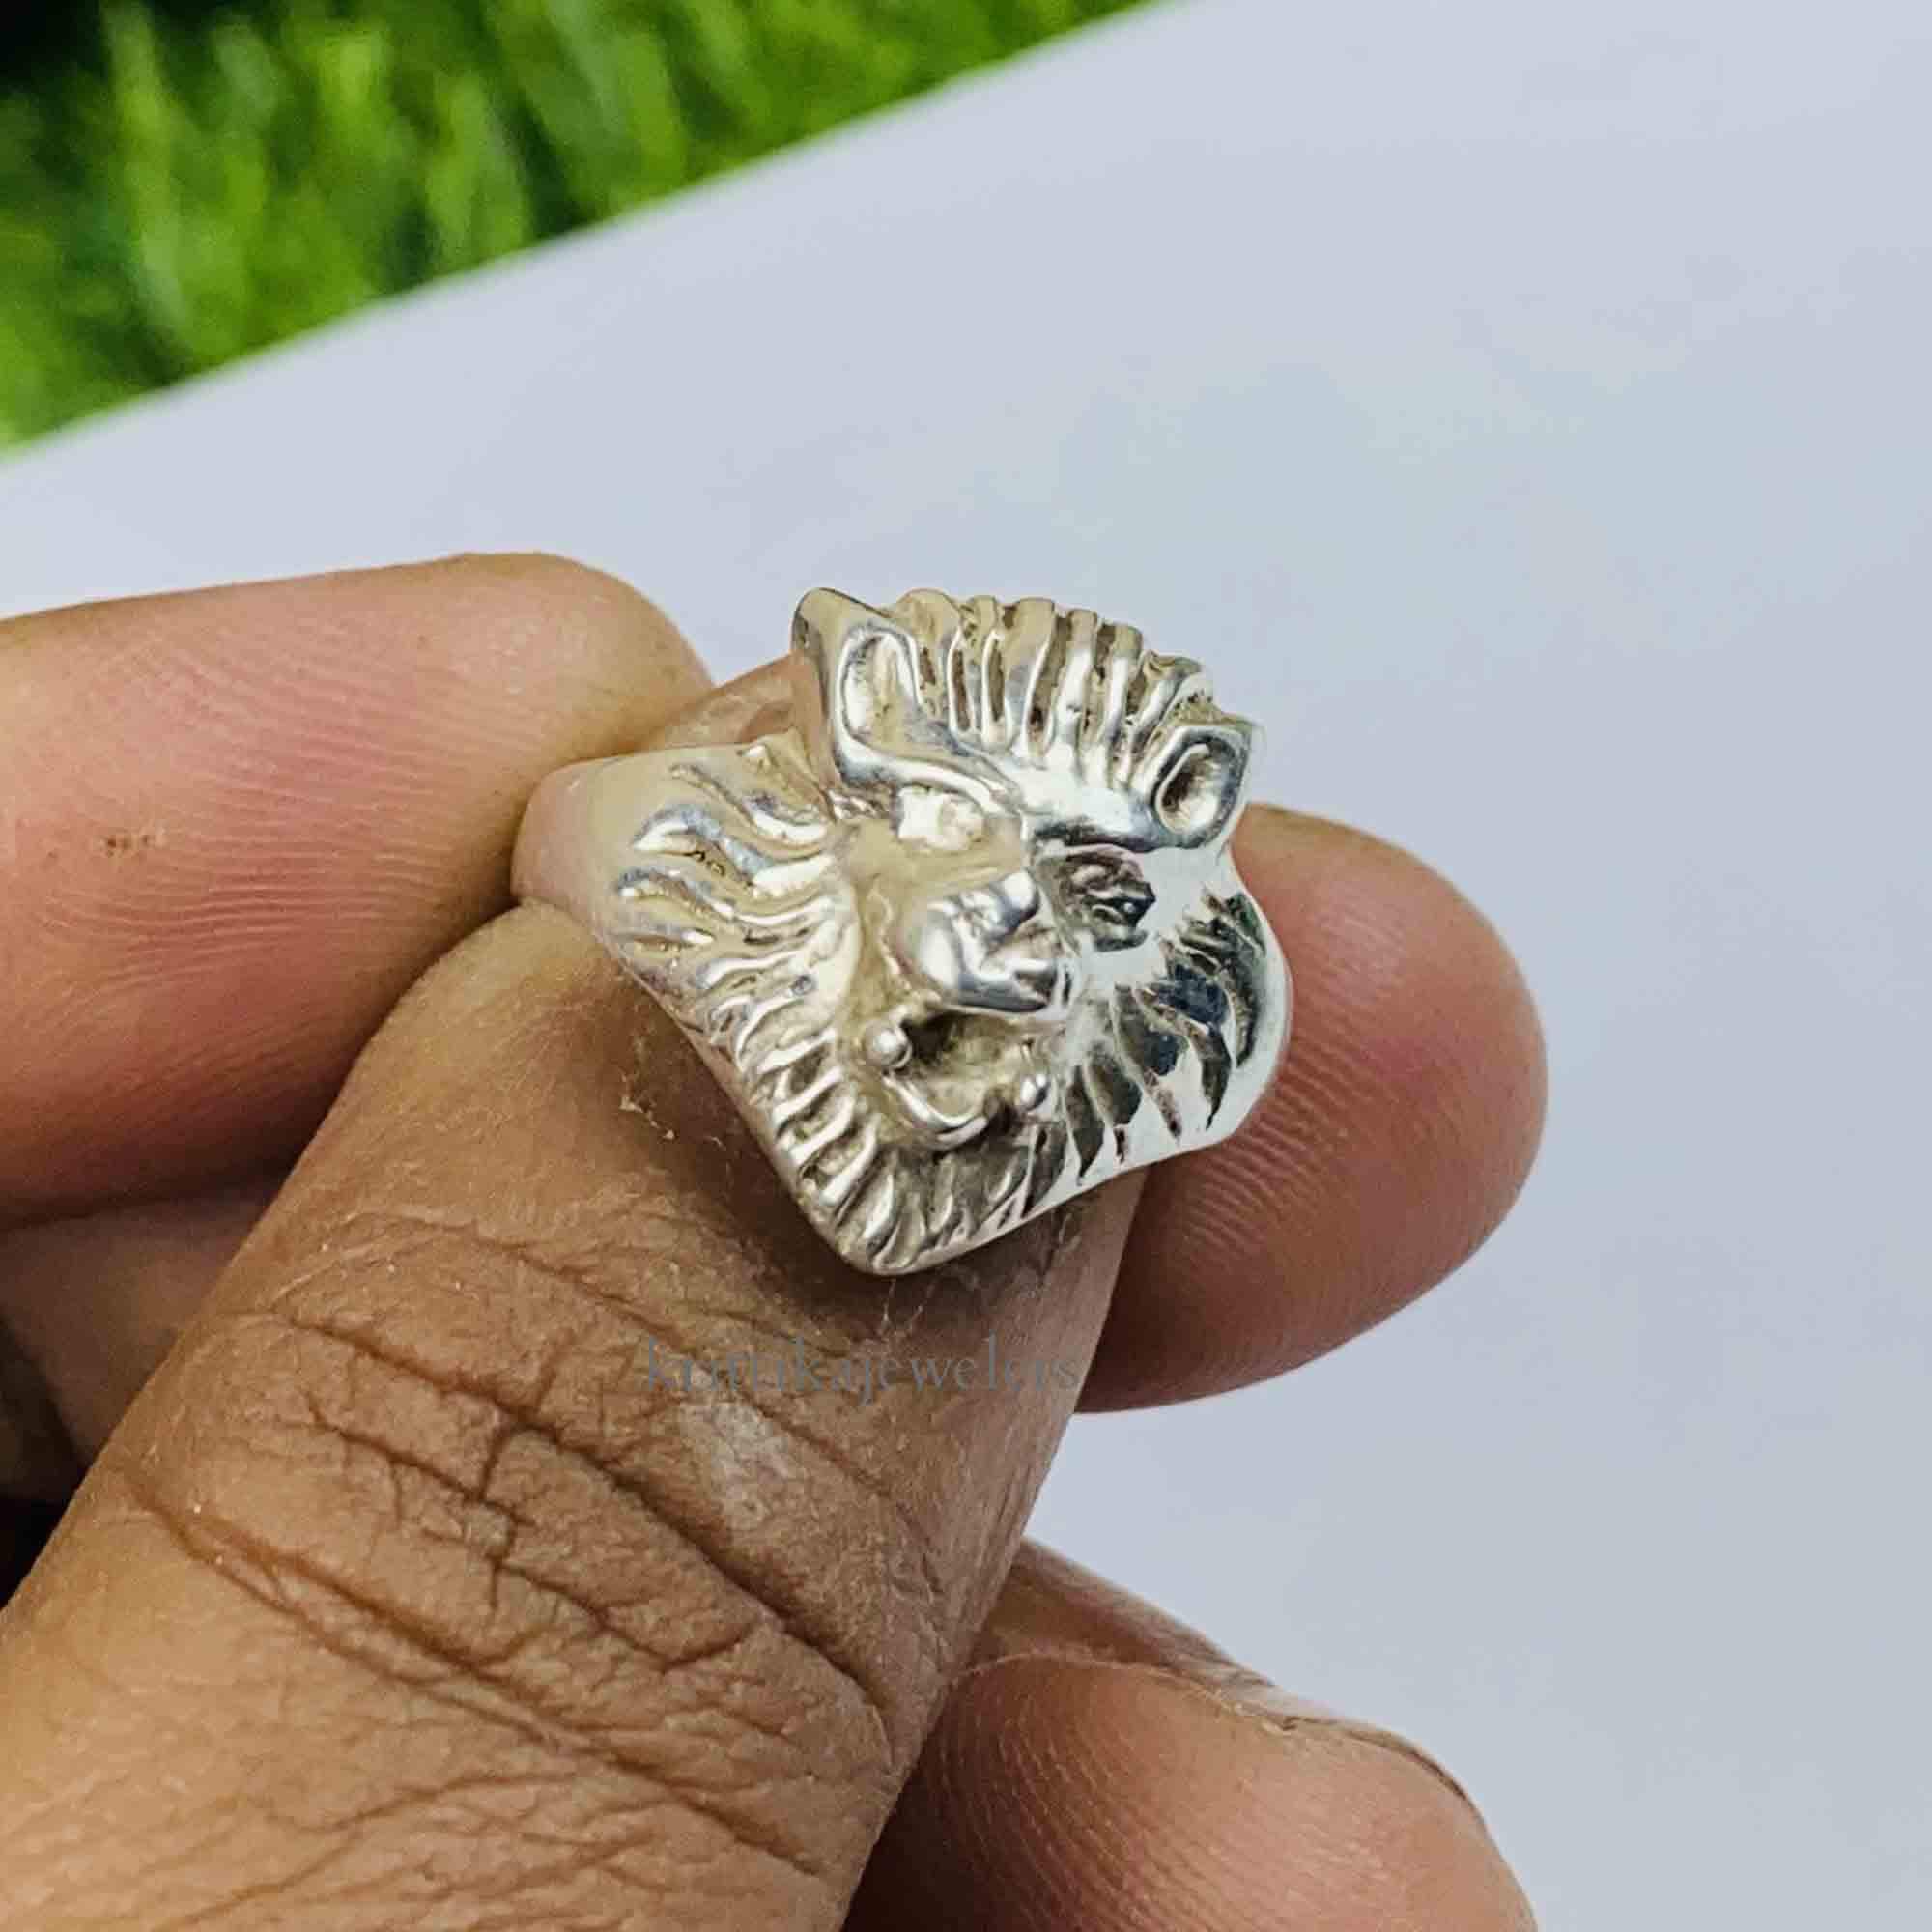 Cute Lion Shaped Animal Wrap Ring in Silver Sizes 7 to 9 | DOTOLY